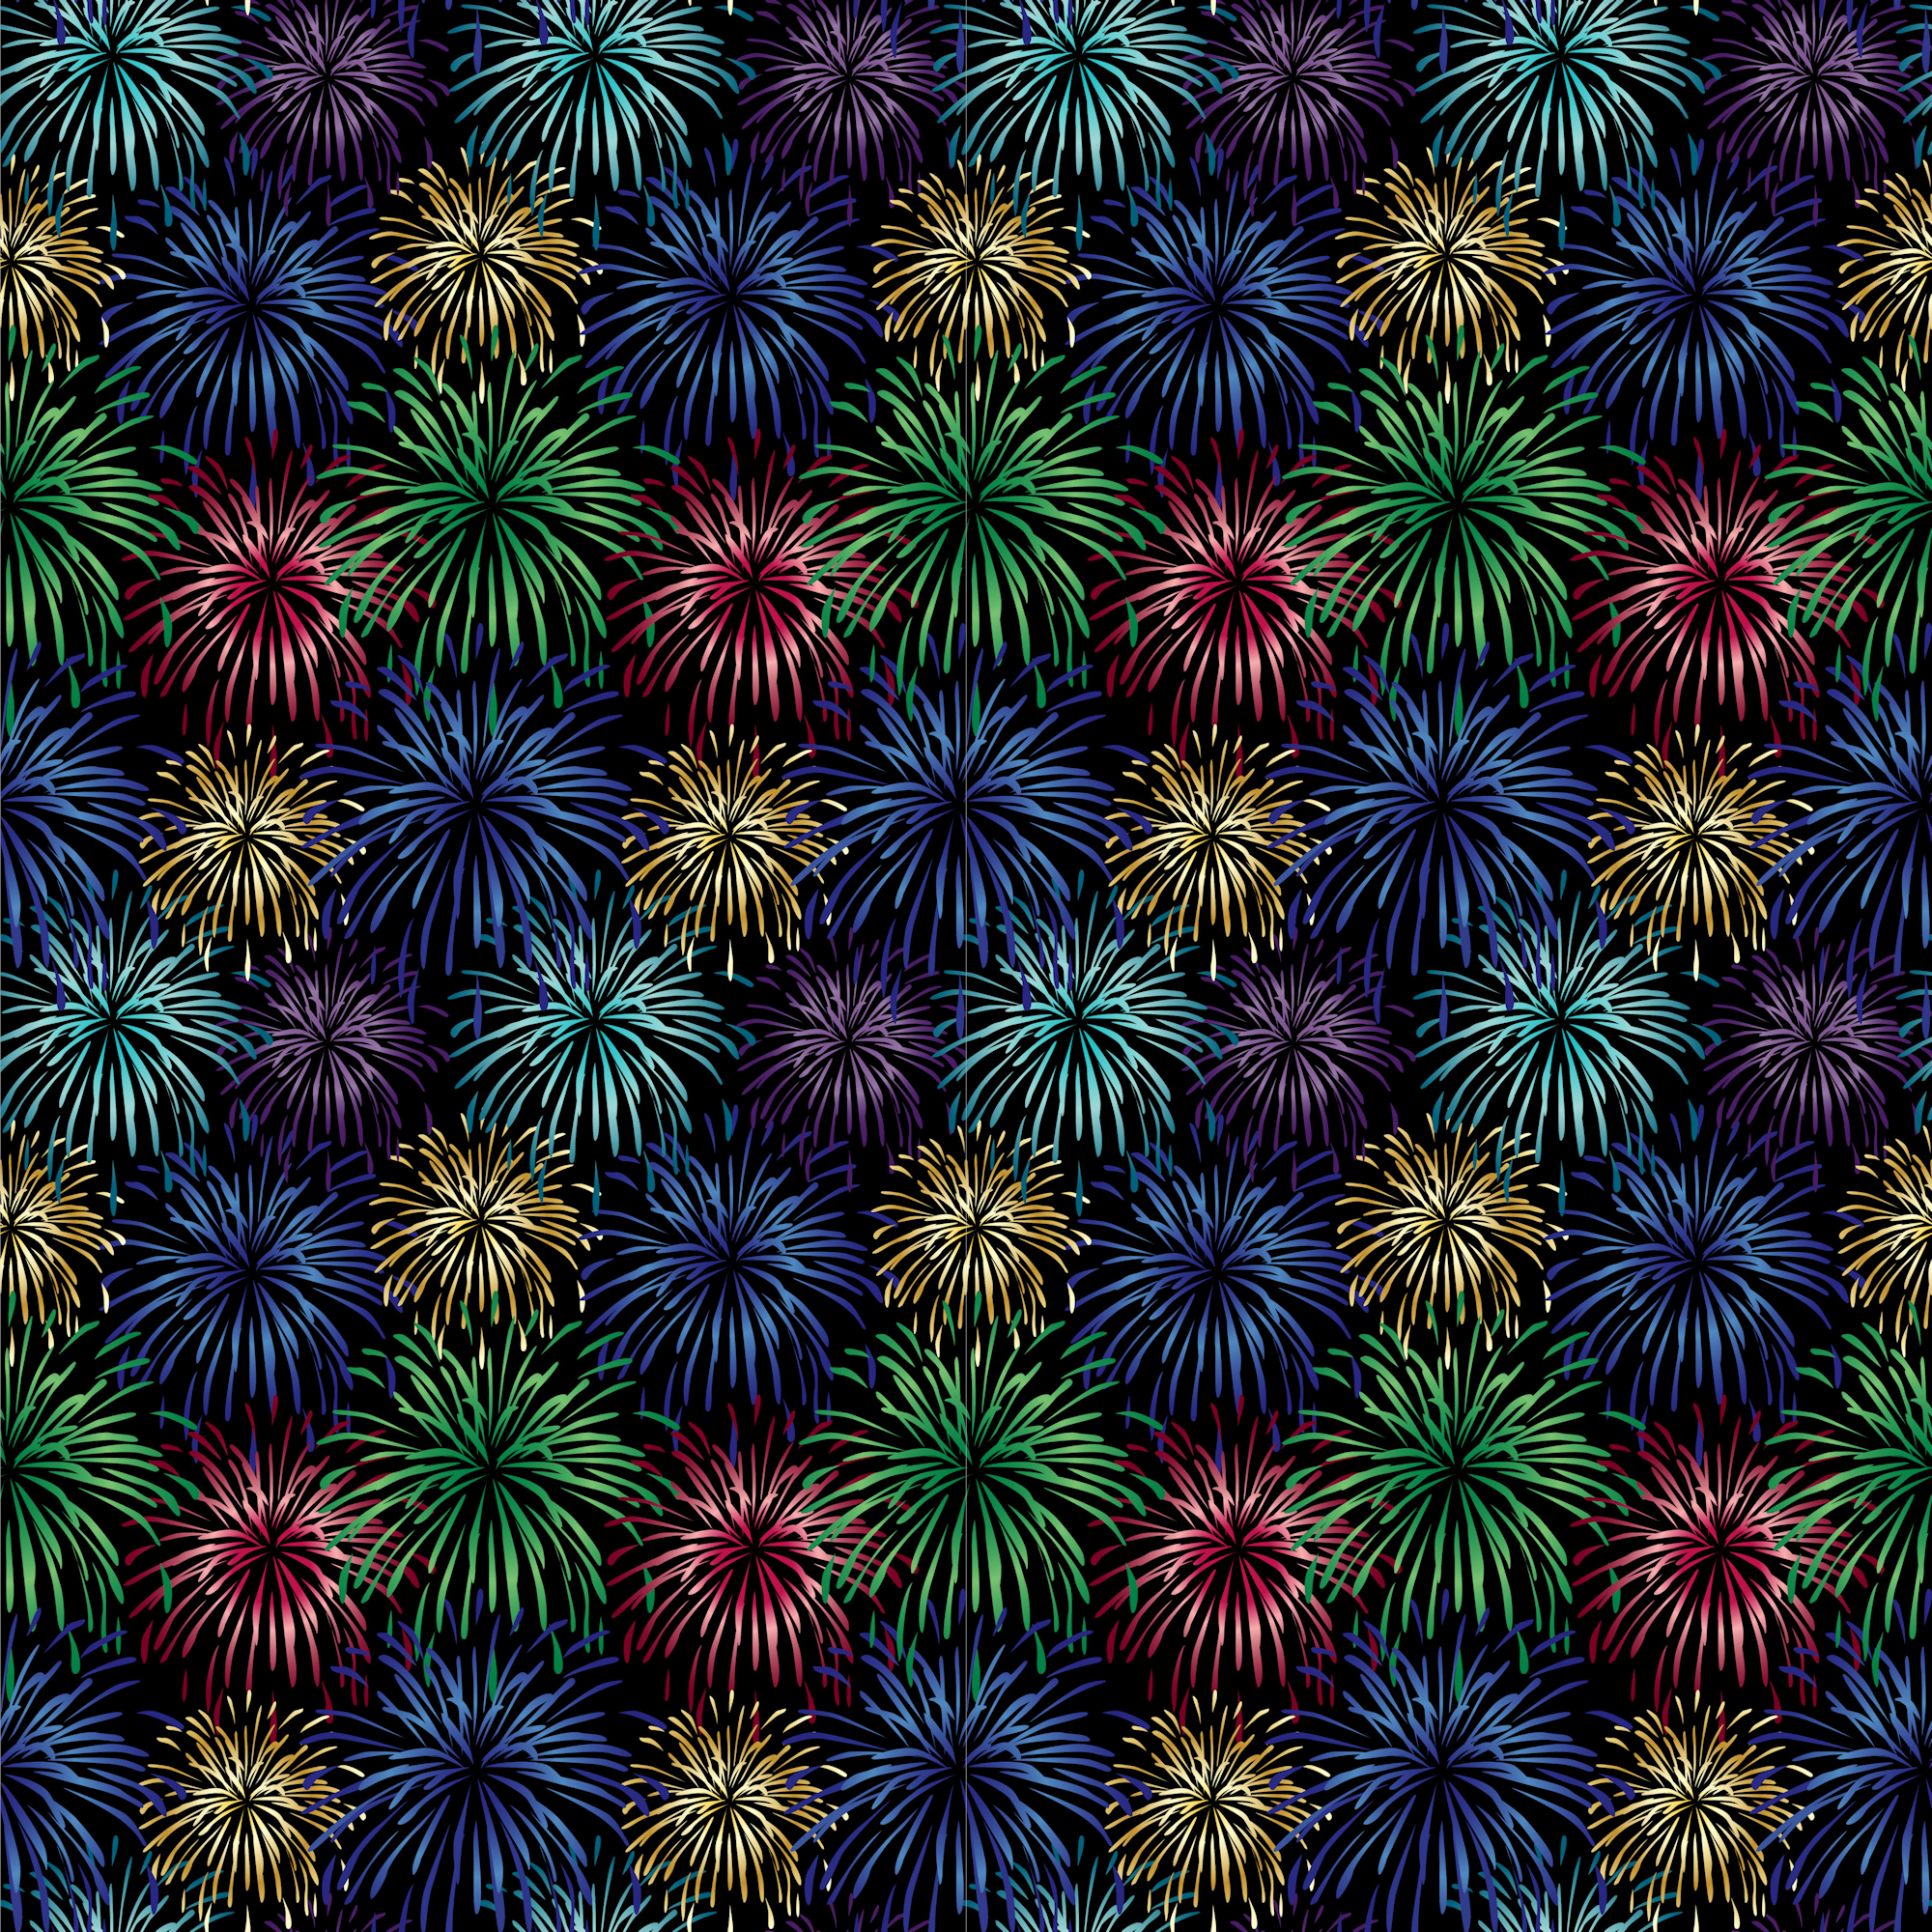 Happy New Year Collection Fireworks All Around 12 x 12 Double-Sided Scrapbook Paper by SSC Designs